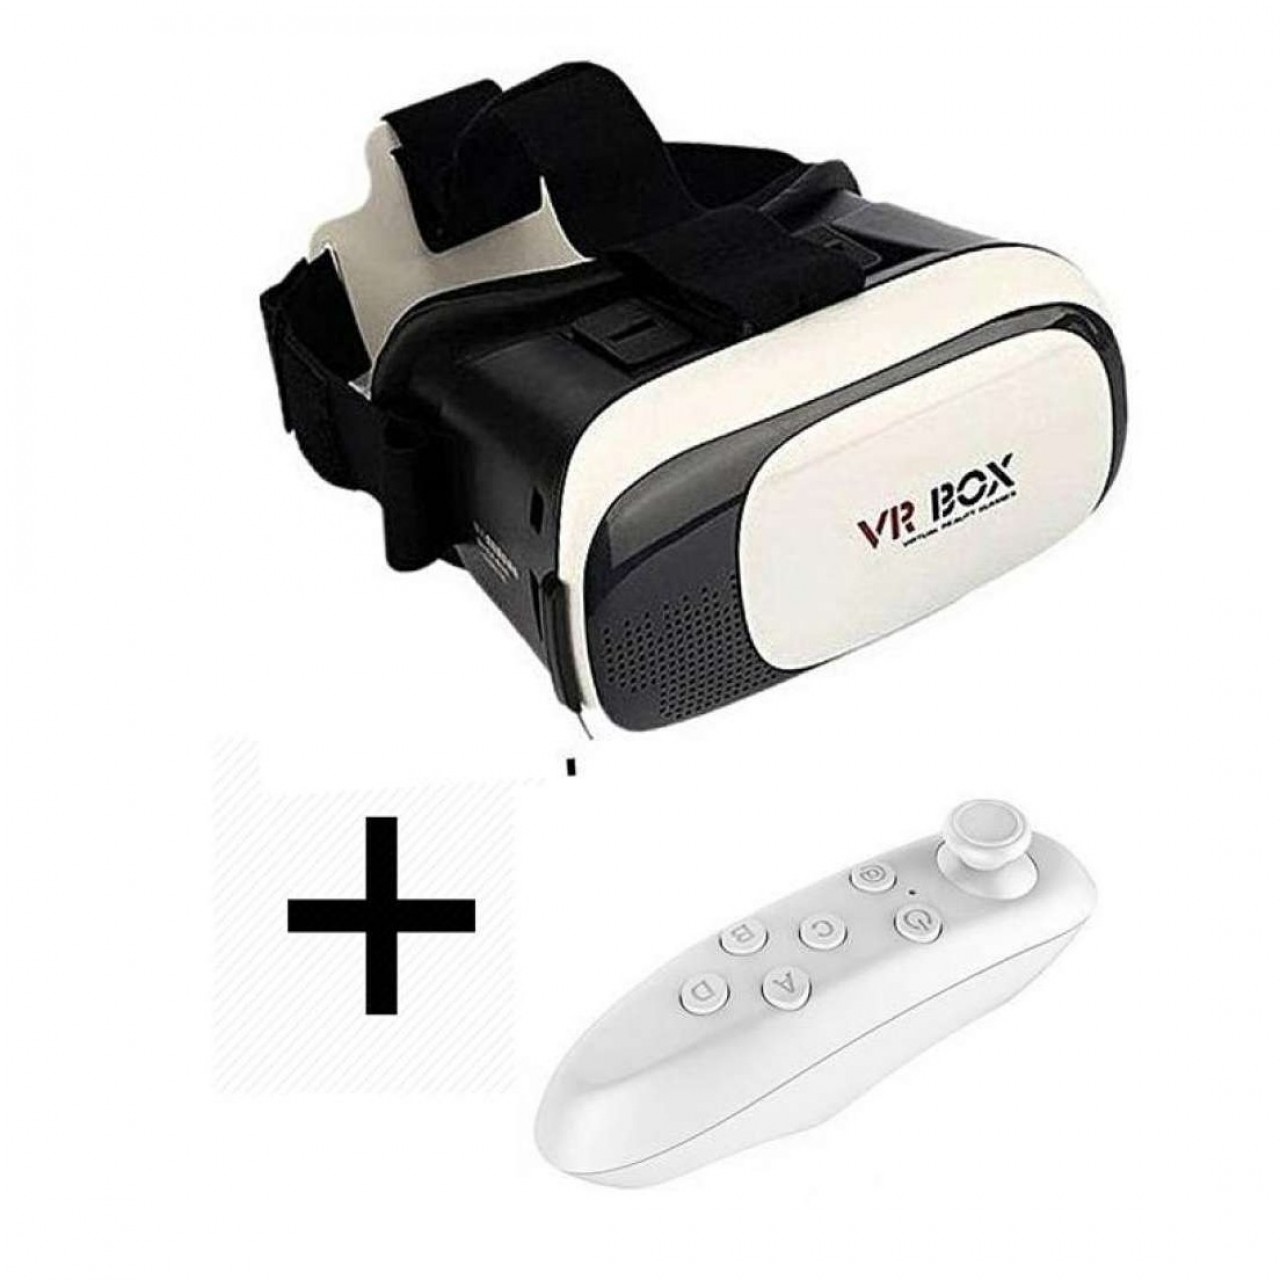 Vr Box 2.0 3D Glasses - All Phone Supported Free Remote